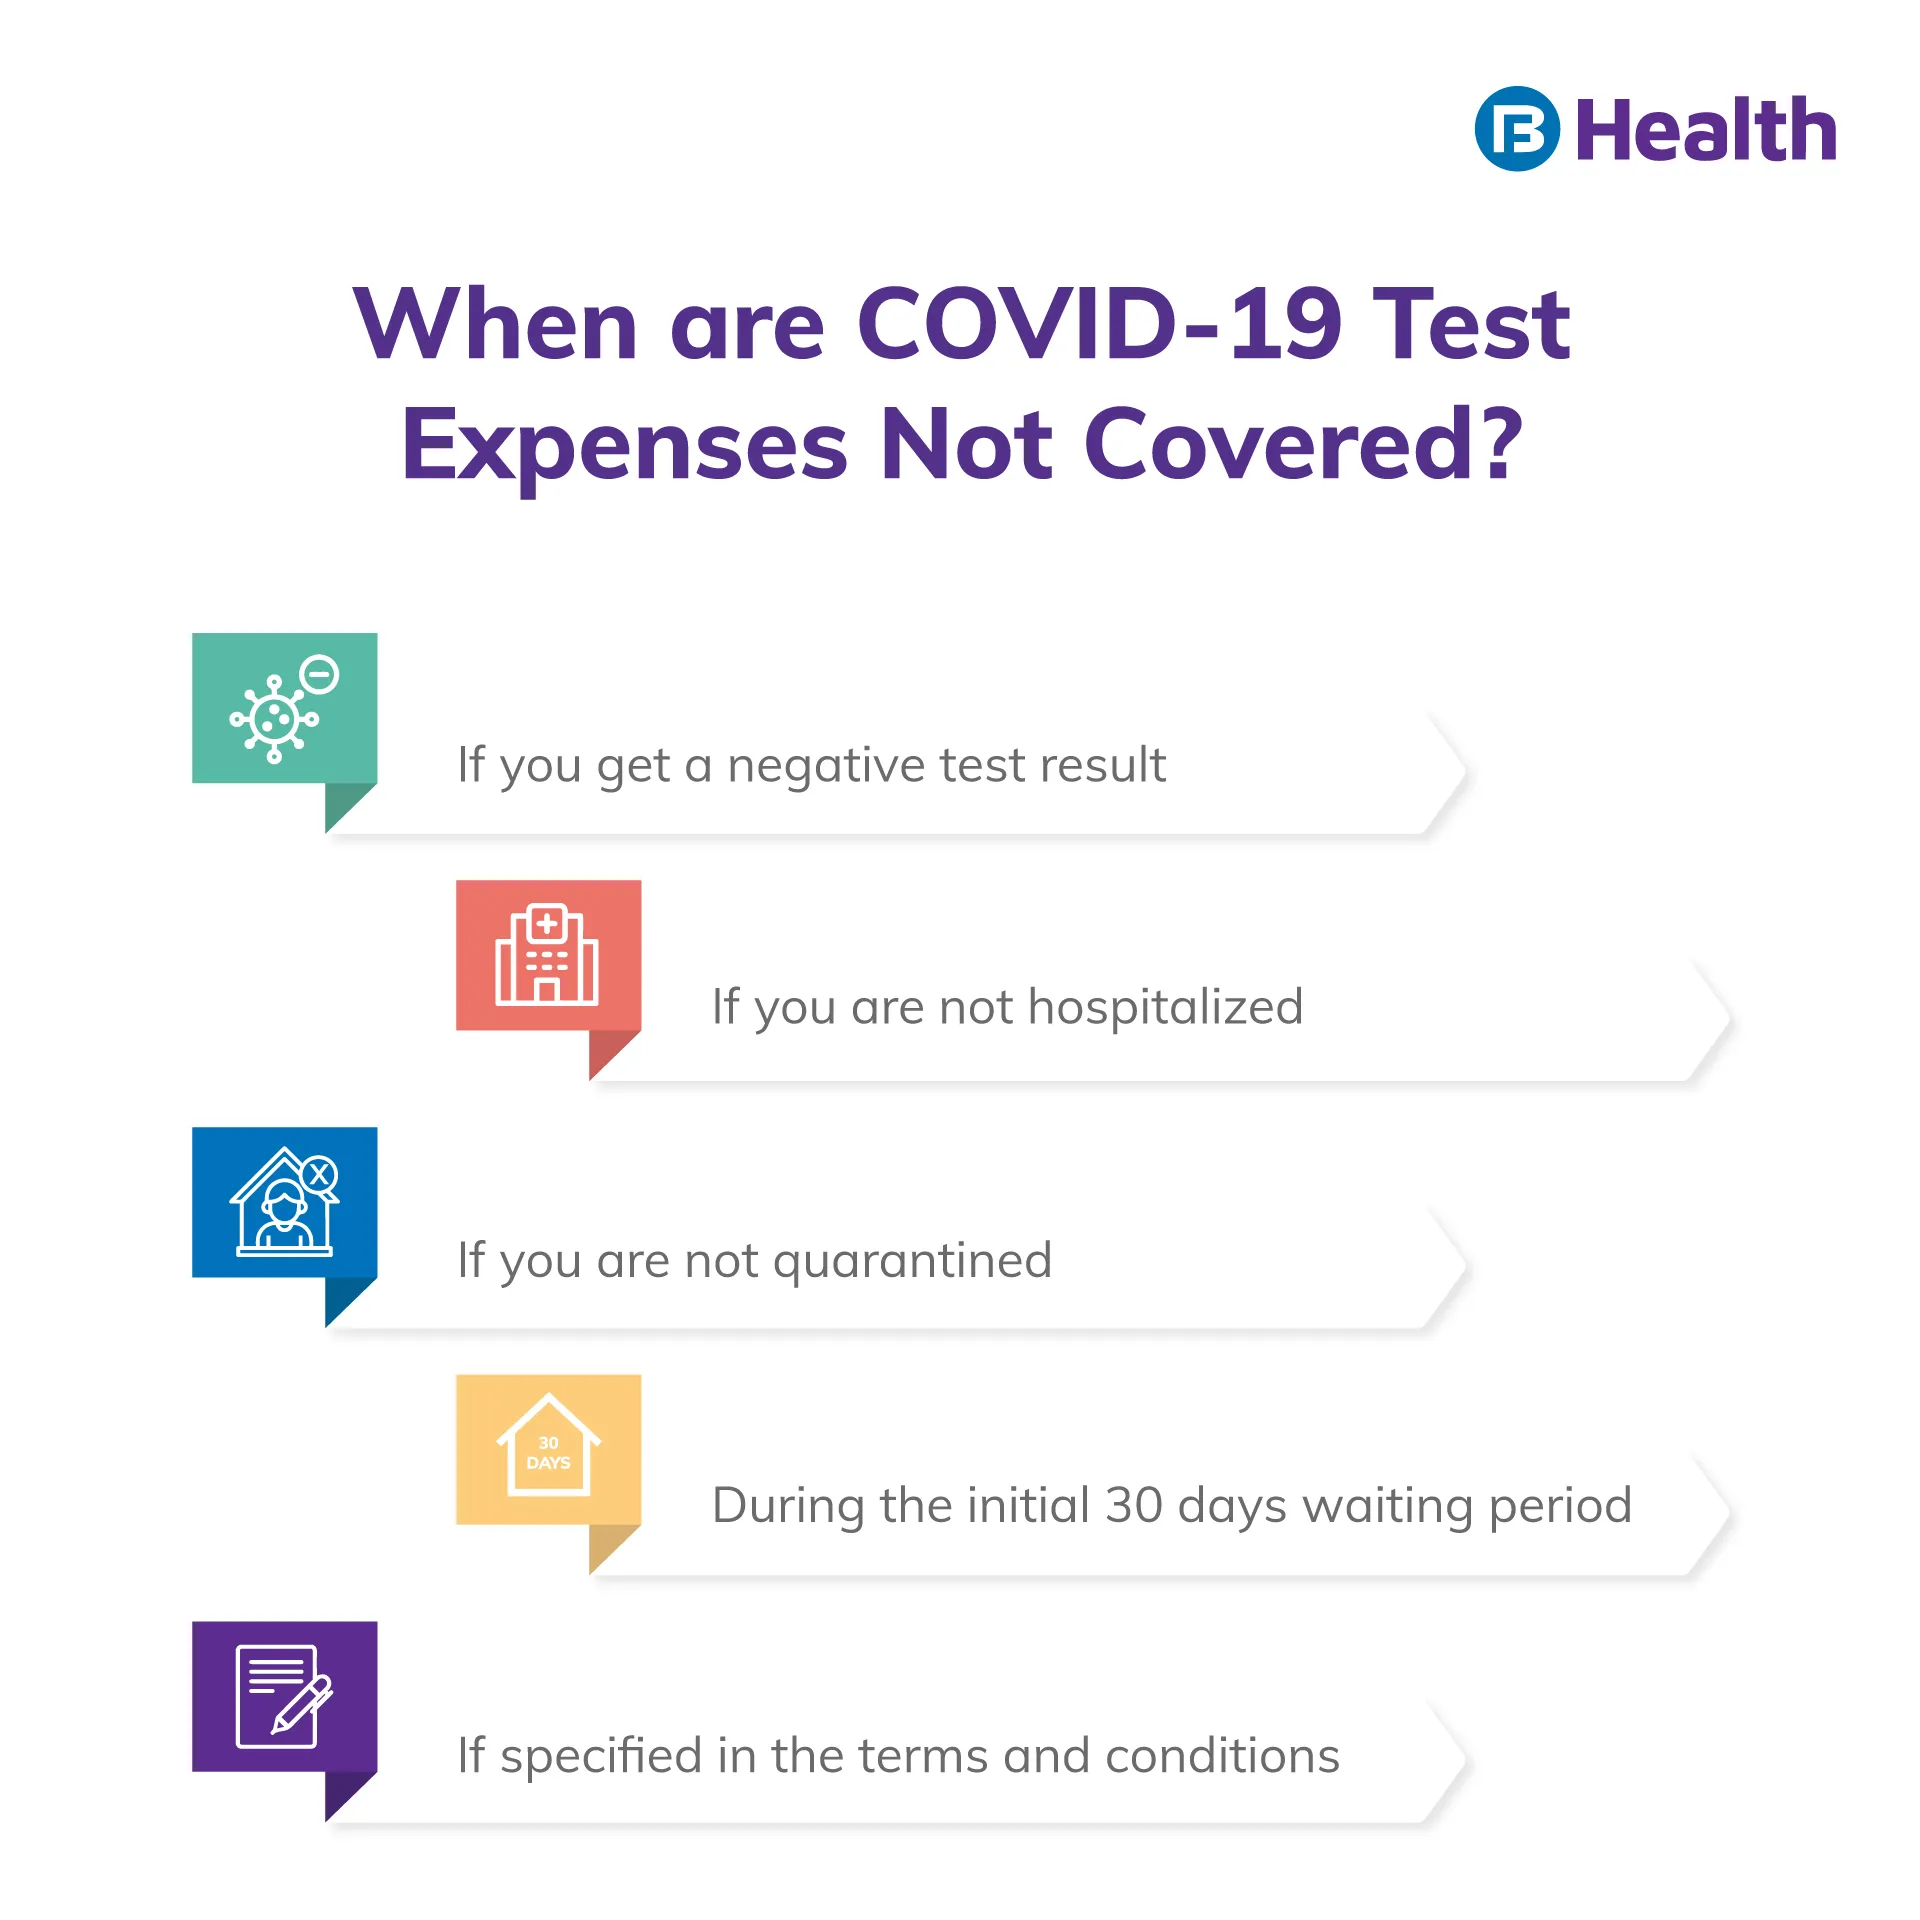 COVID-19 Test not Covered Under Health Insurance